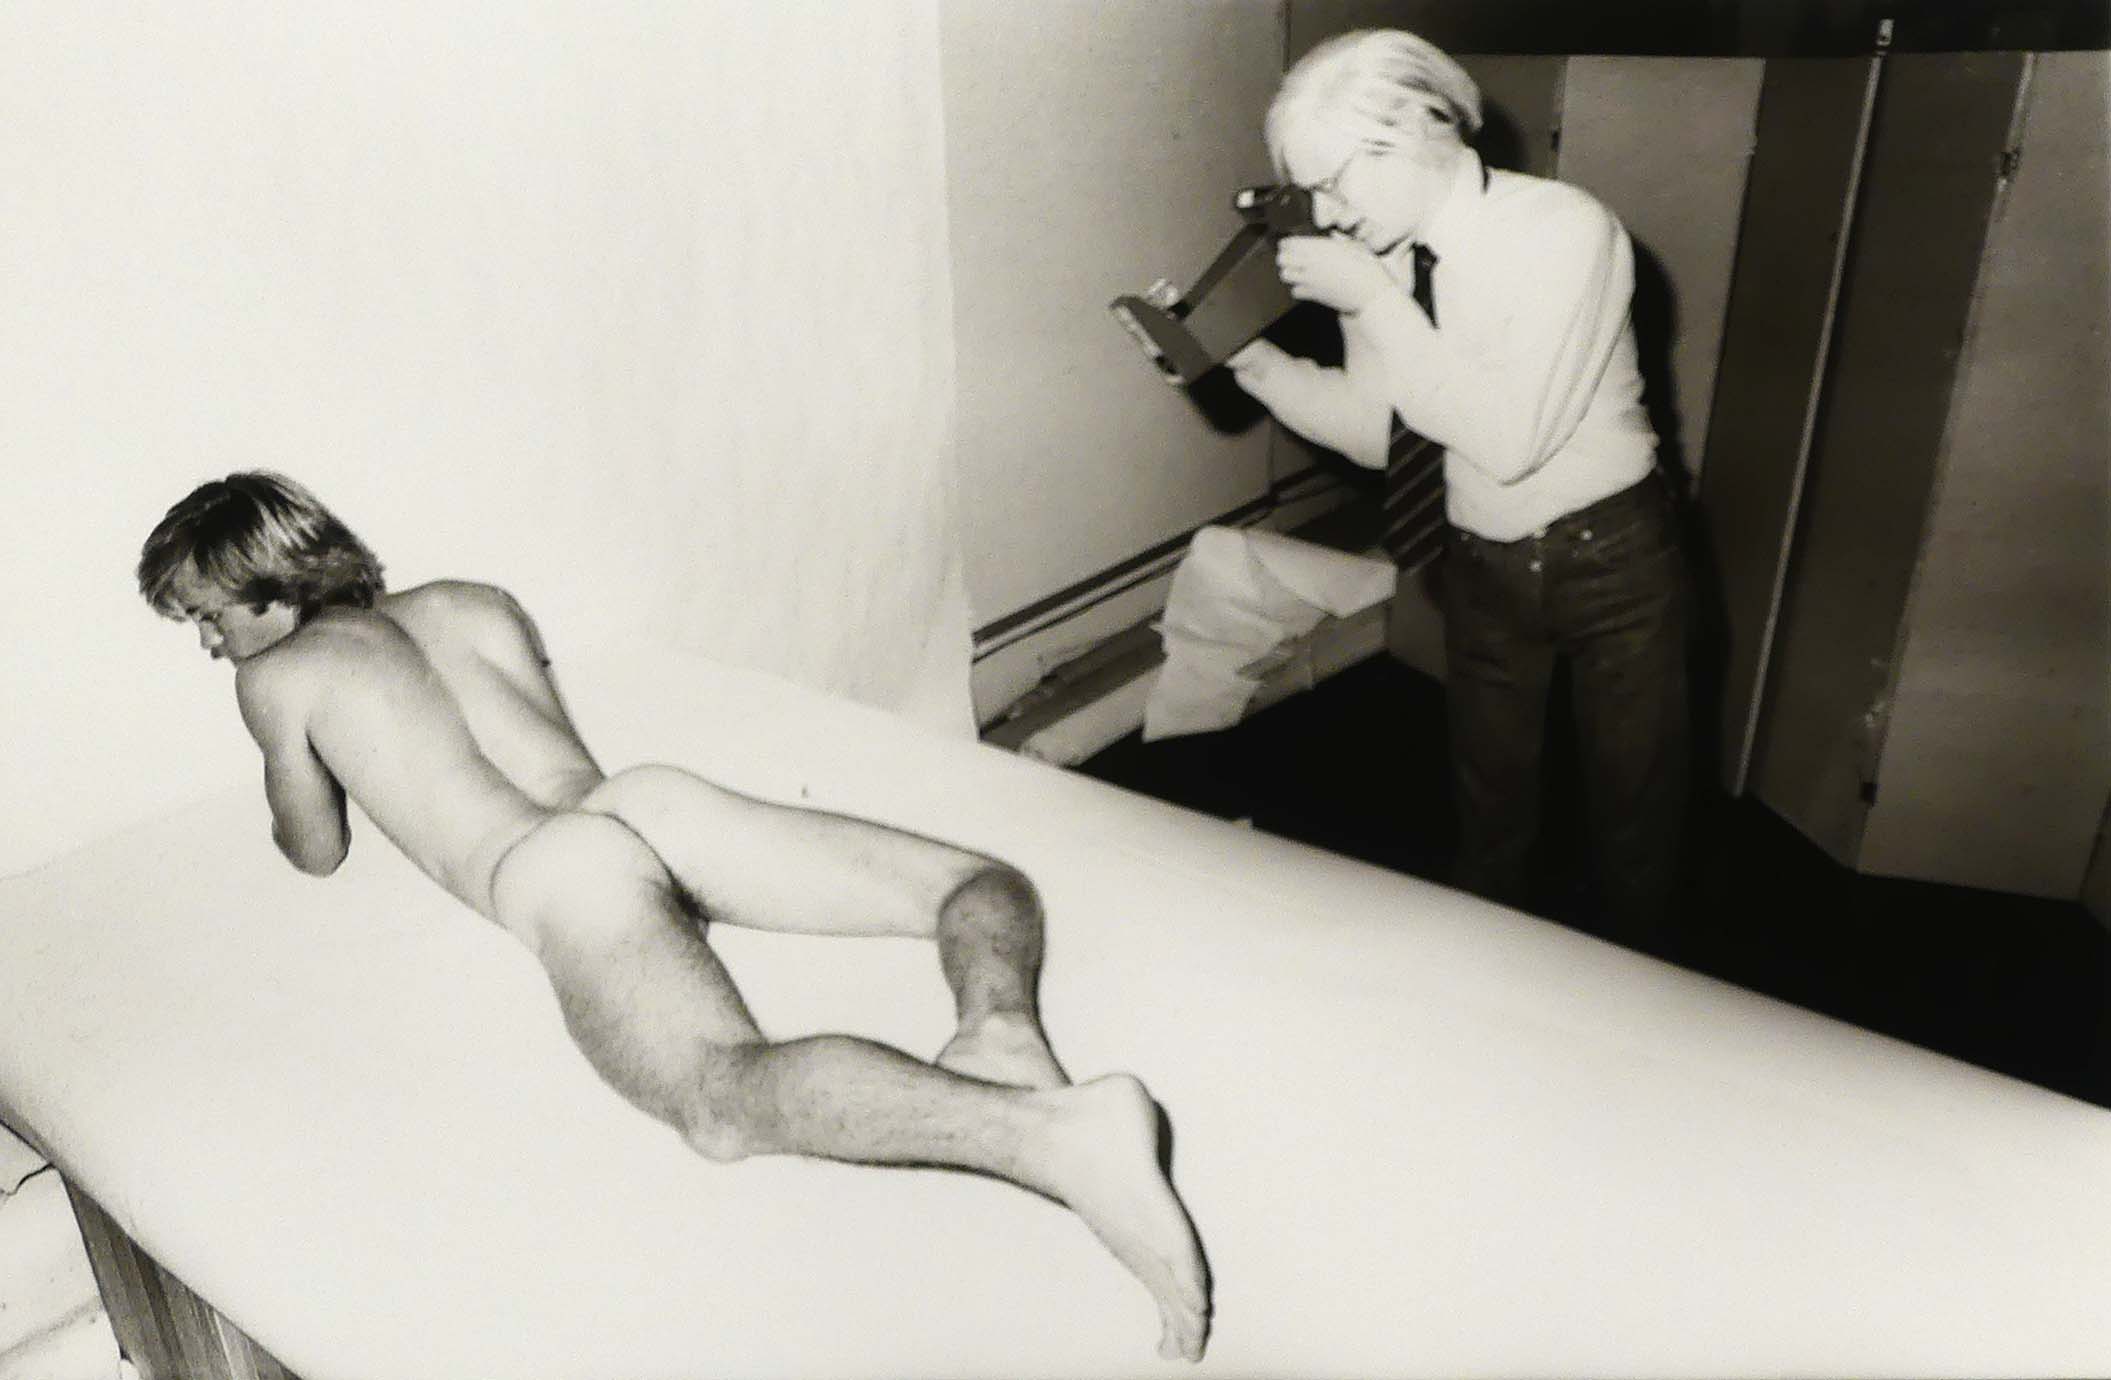 Andy Photographing Bobby Hunter (1977). All images by Christopher Makos courtesy of Daniel Cooney Fine Art.